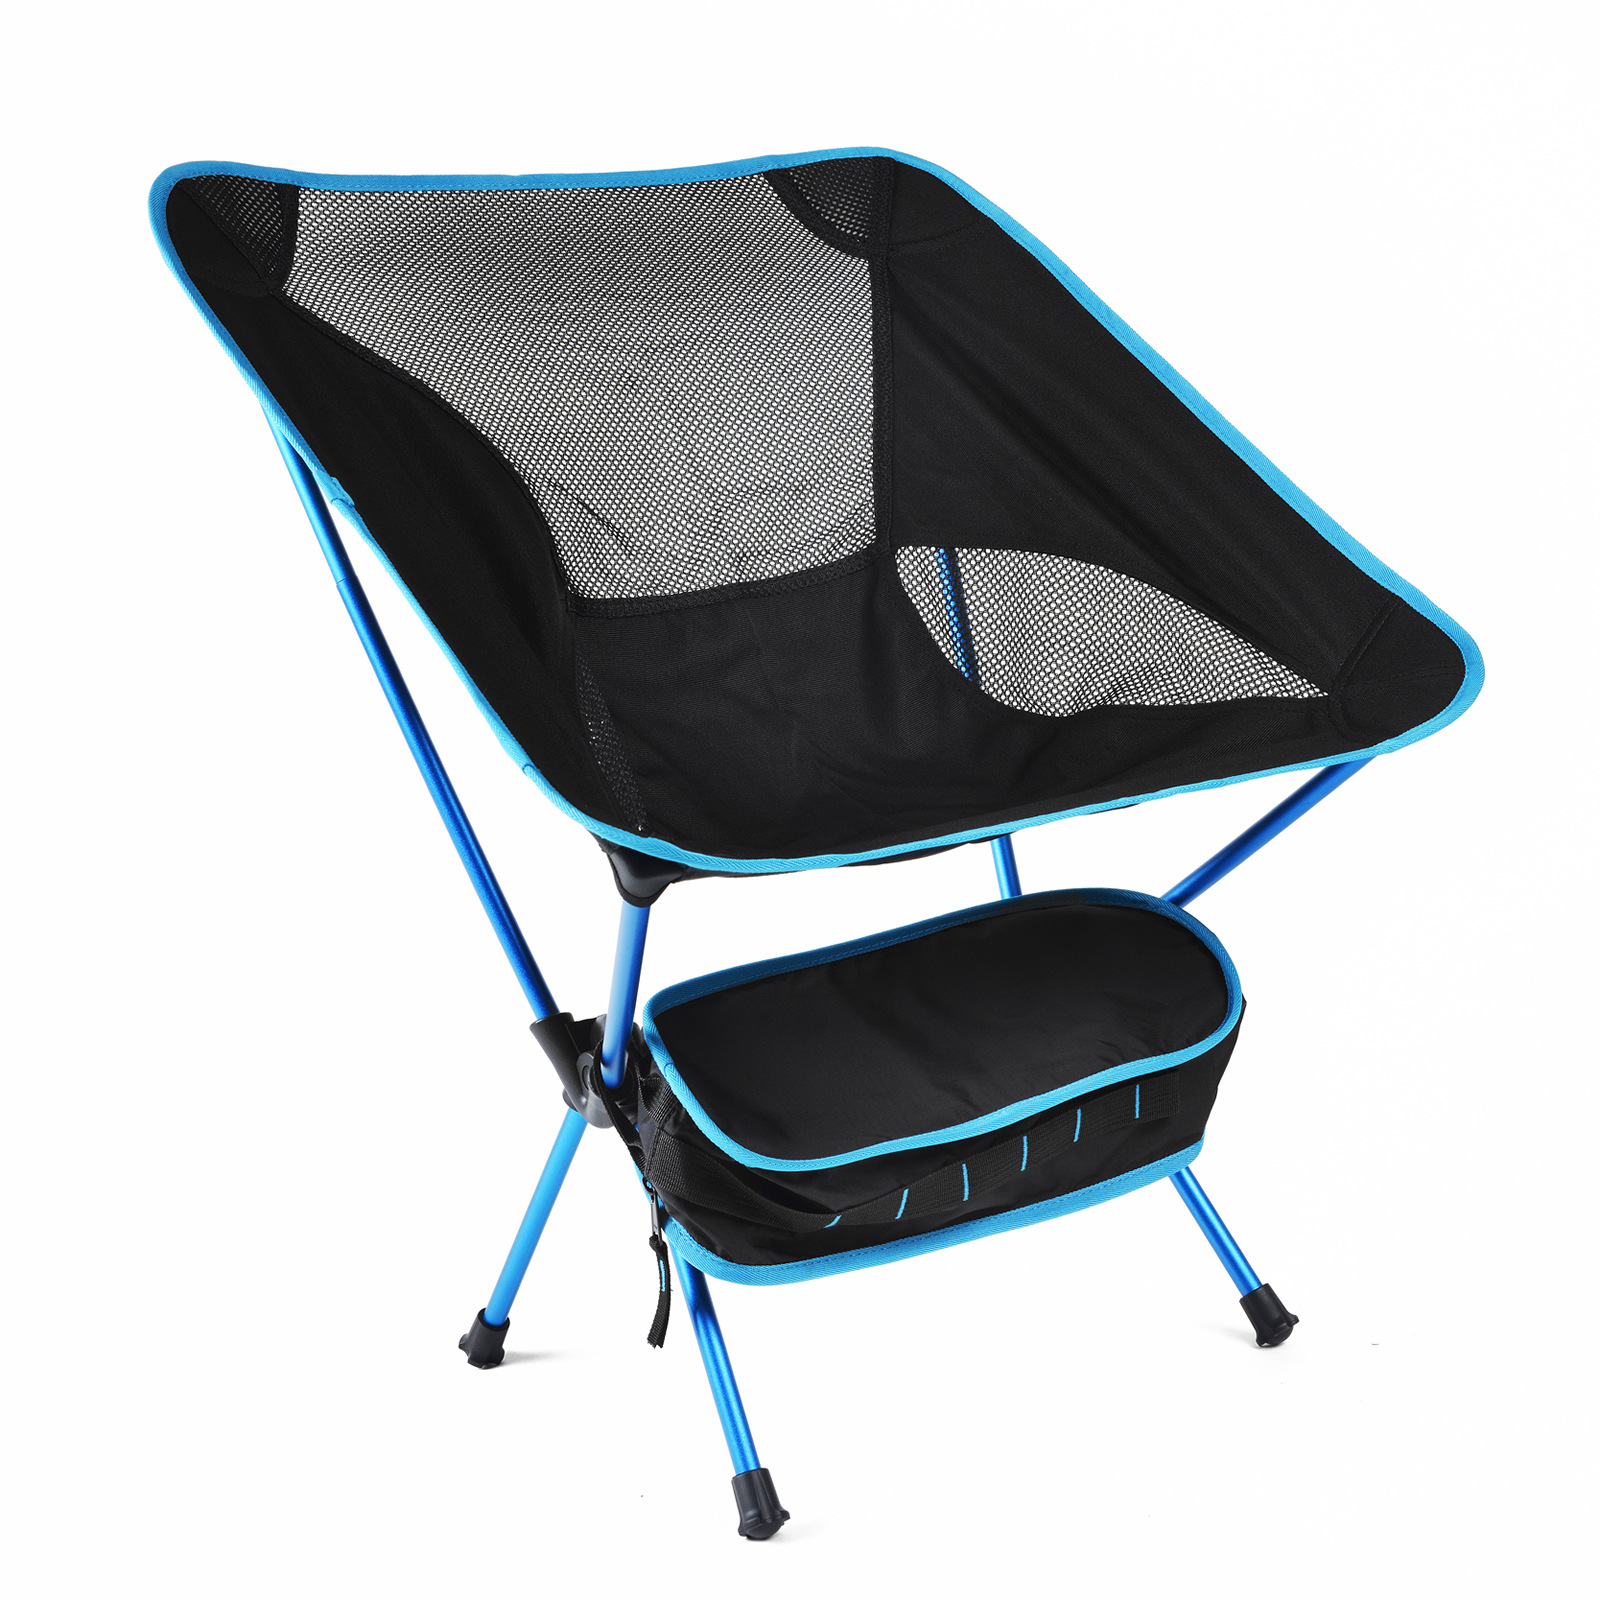 Naturehike Ultralight Folding Camping Chair Comfortable Portable Low Back Chair, Compact Lightweight Chair for Outdoors,Lawn,Hiking,Beach,Fishing,Picnic,Backpacking,Spherical Foot Cover,with Carry Bag